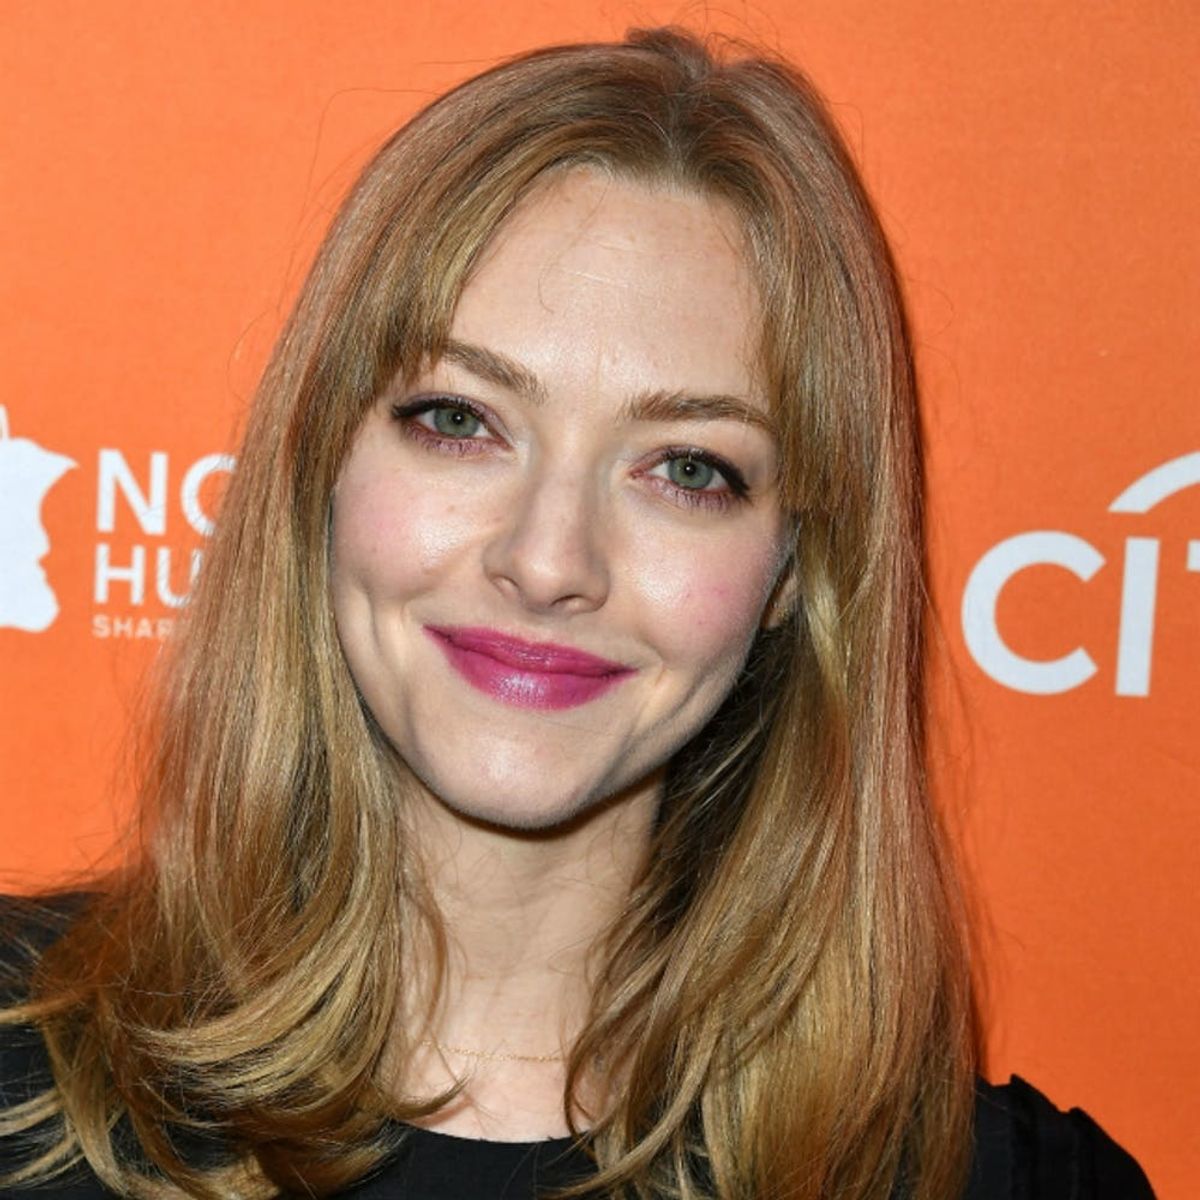 Amanda Seyfried Just Made a Brave Announcement About Her Mental Health